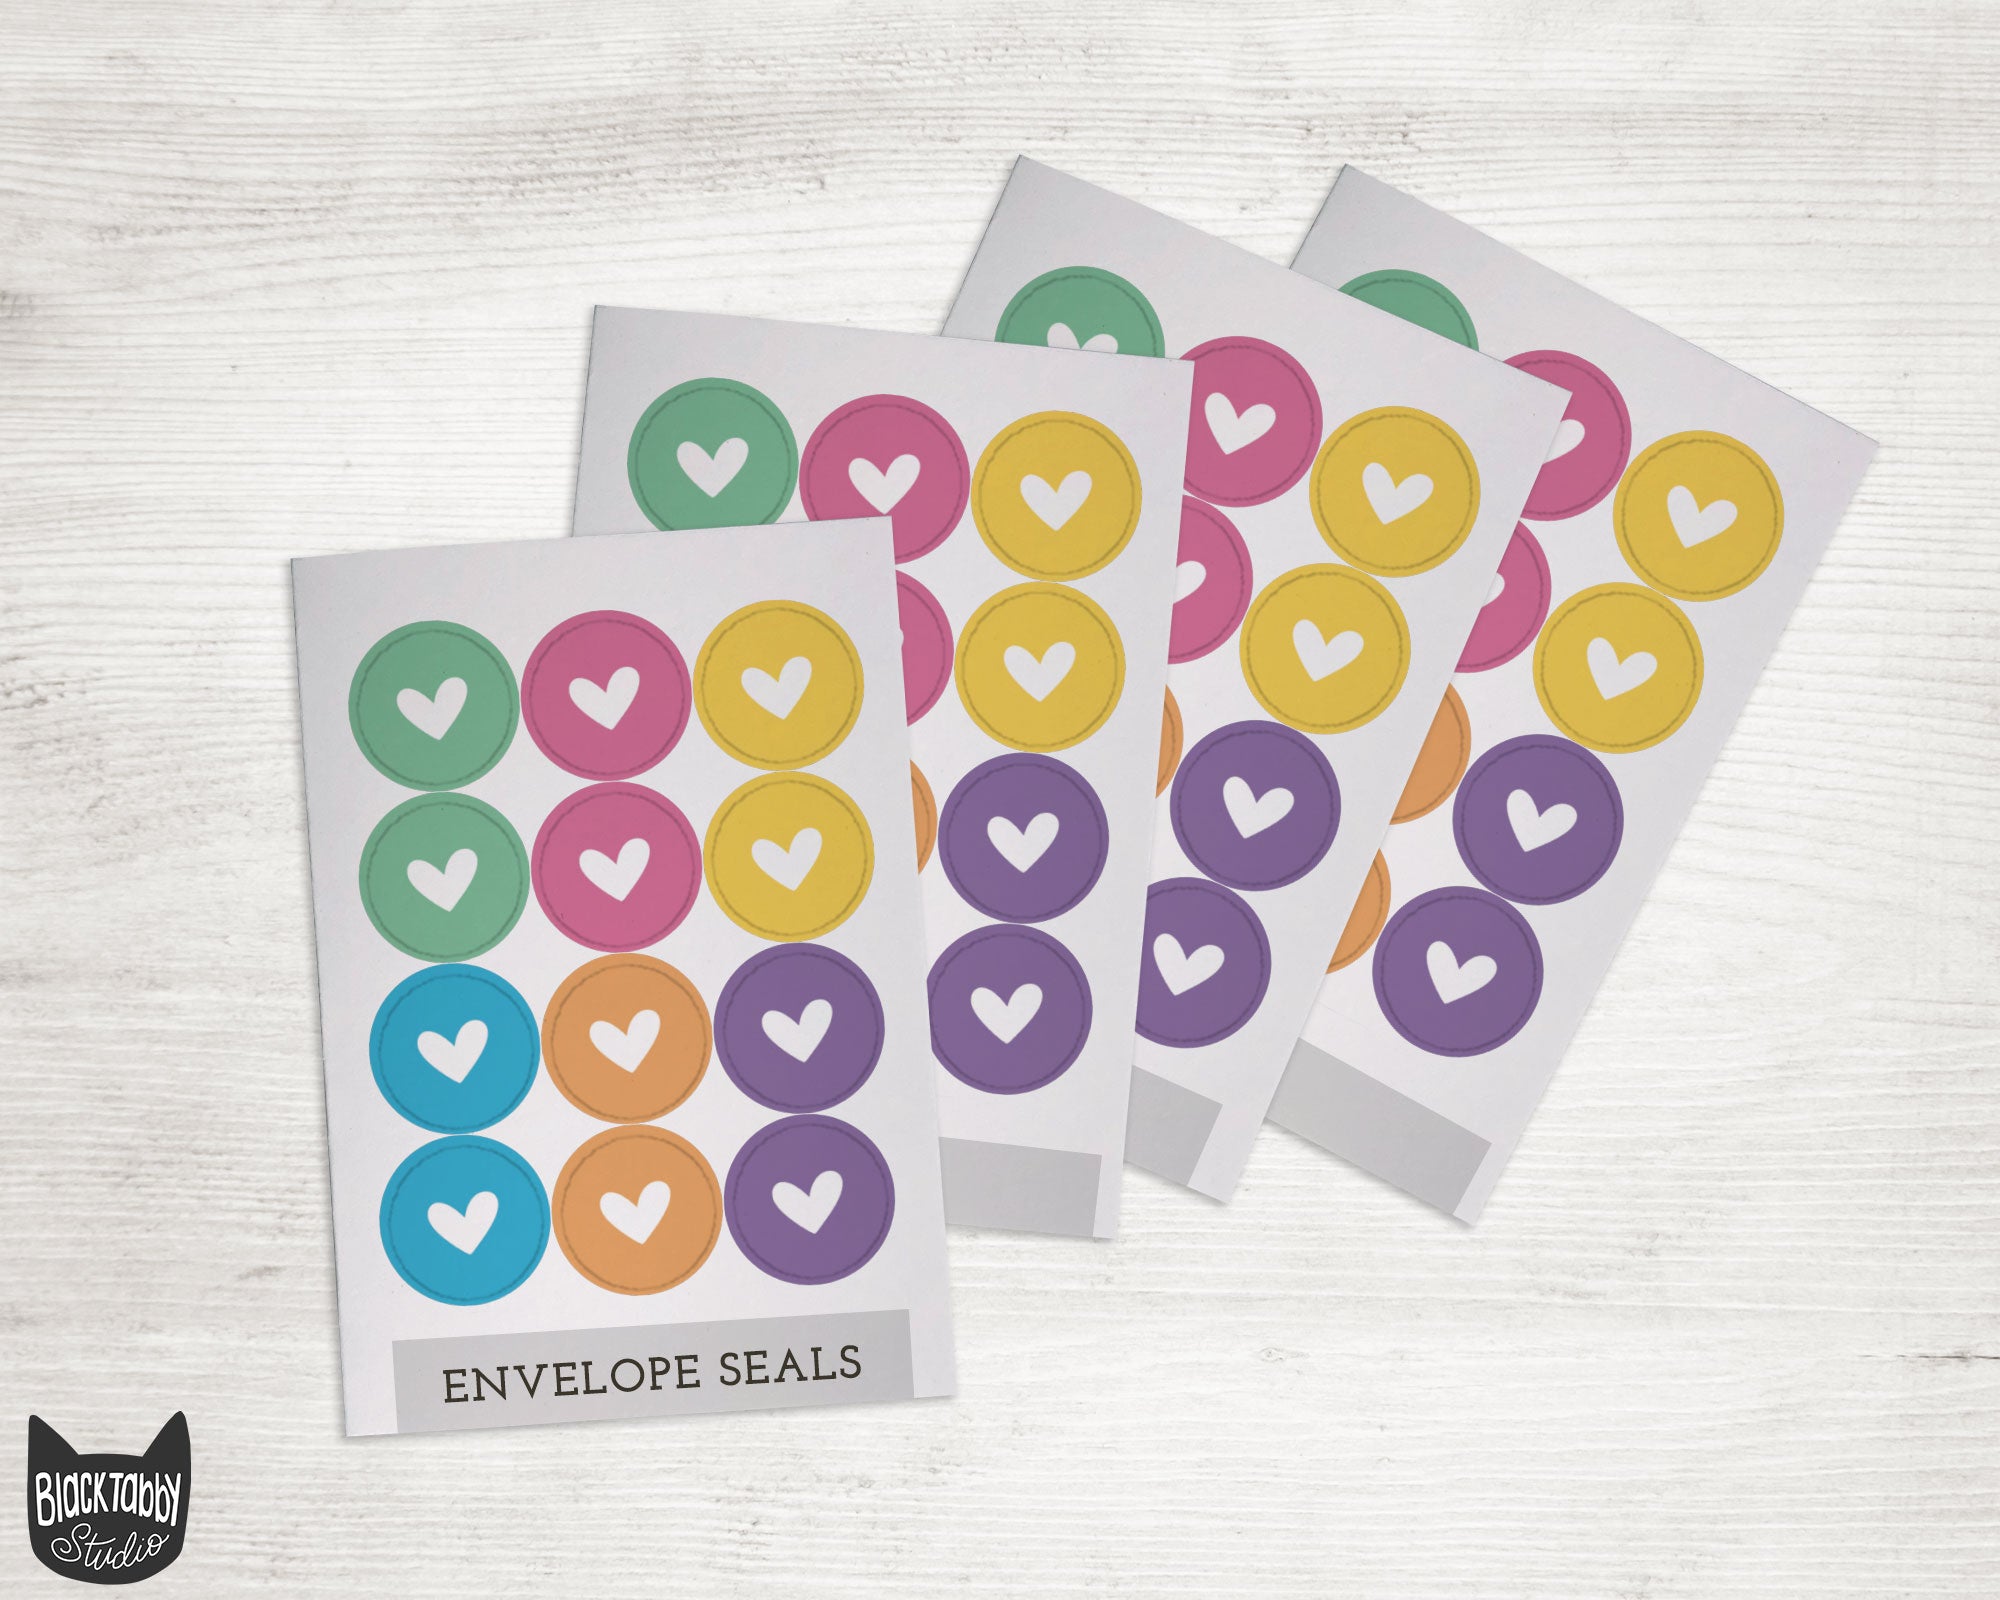 Cute & Colorful Thank You Sticker Seals for Envelopes & Stationery – Black  Tabby Studio